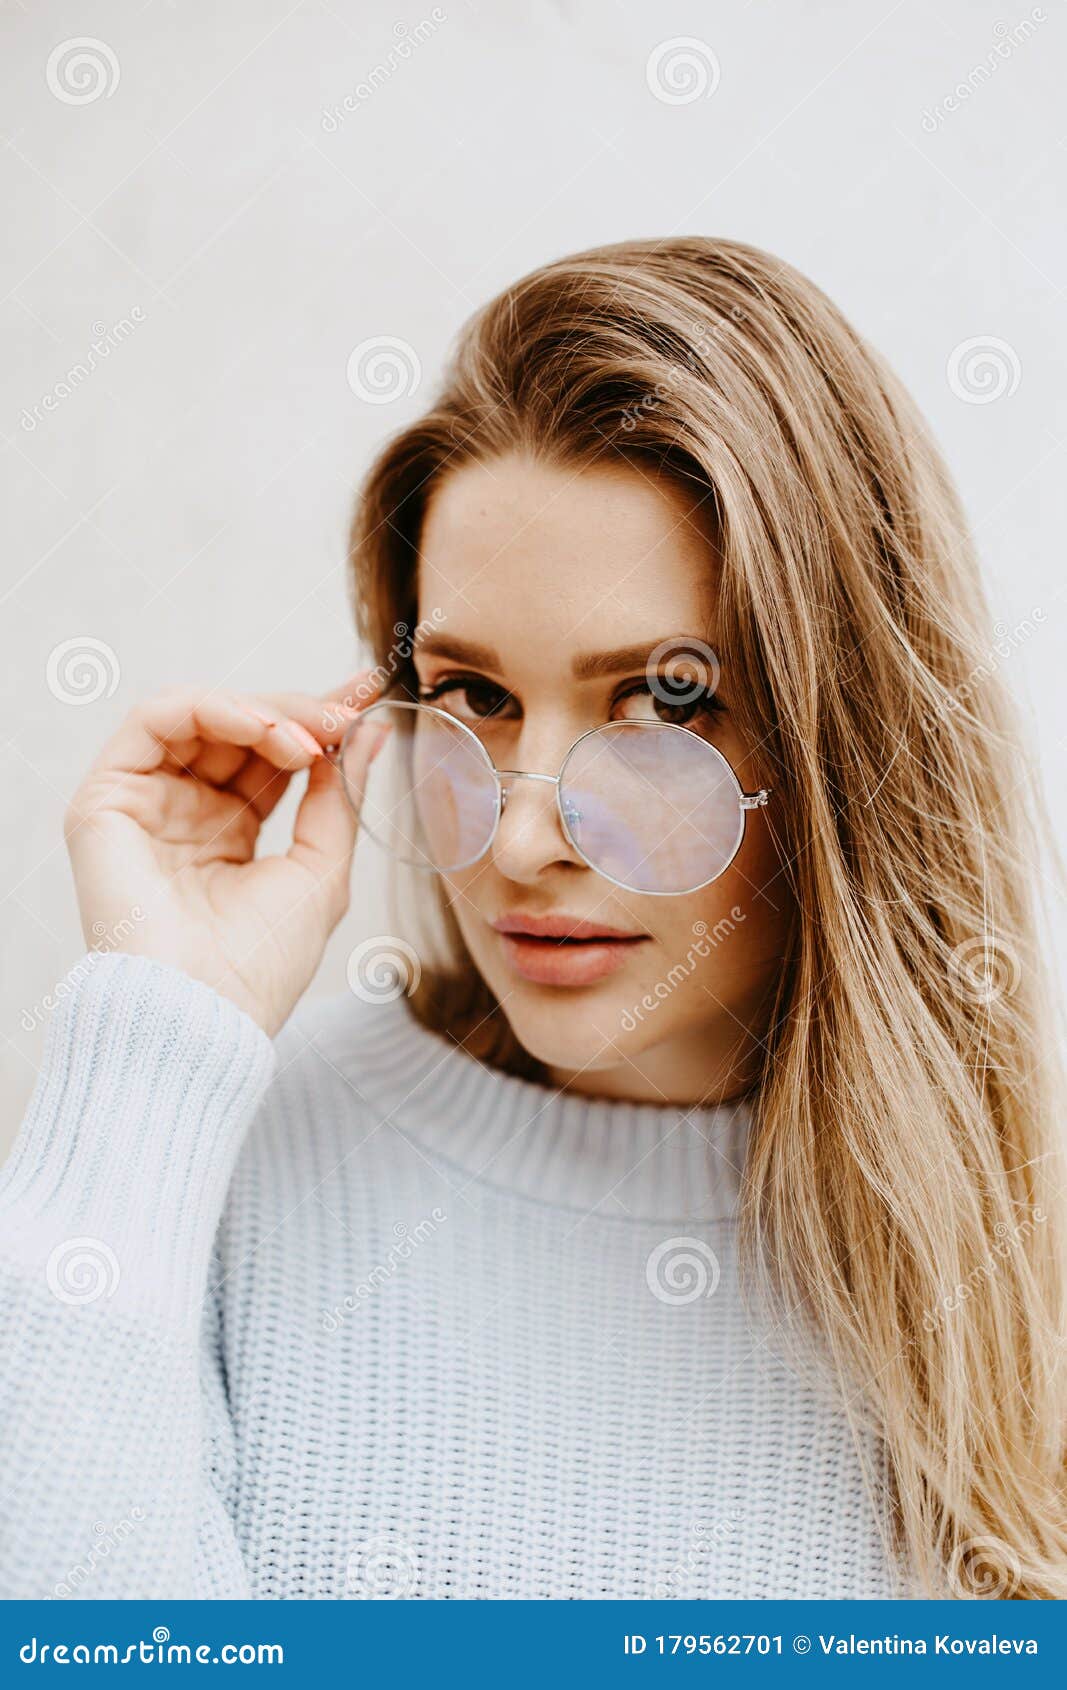 Girl With Brown Eyes With A Strict Look Looks Over Glasses On A White ...